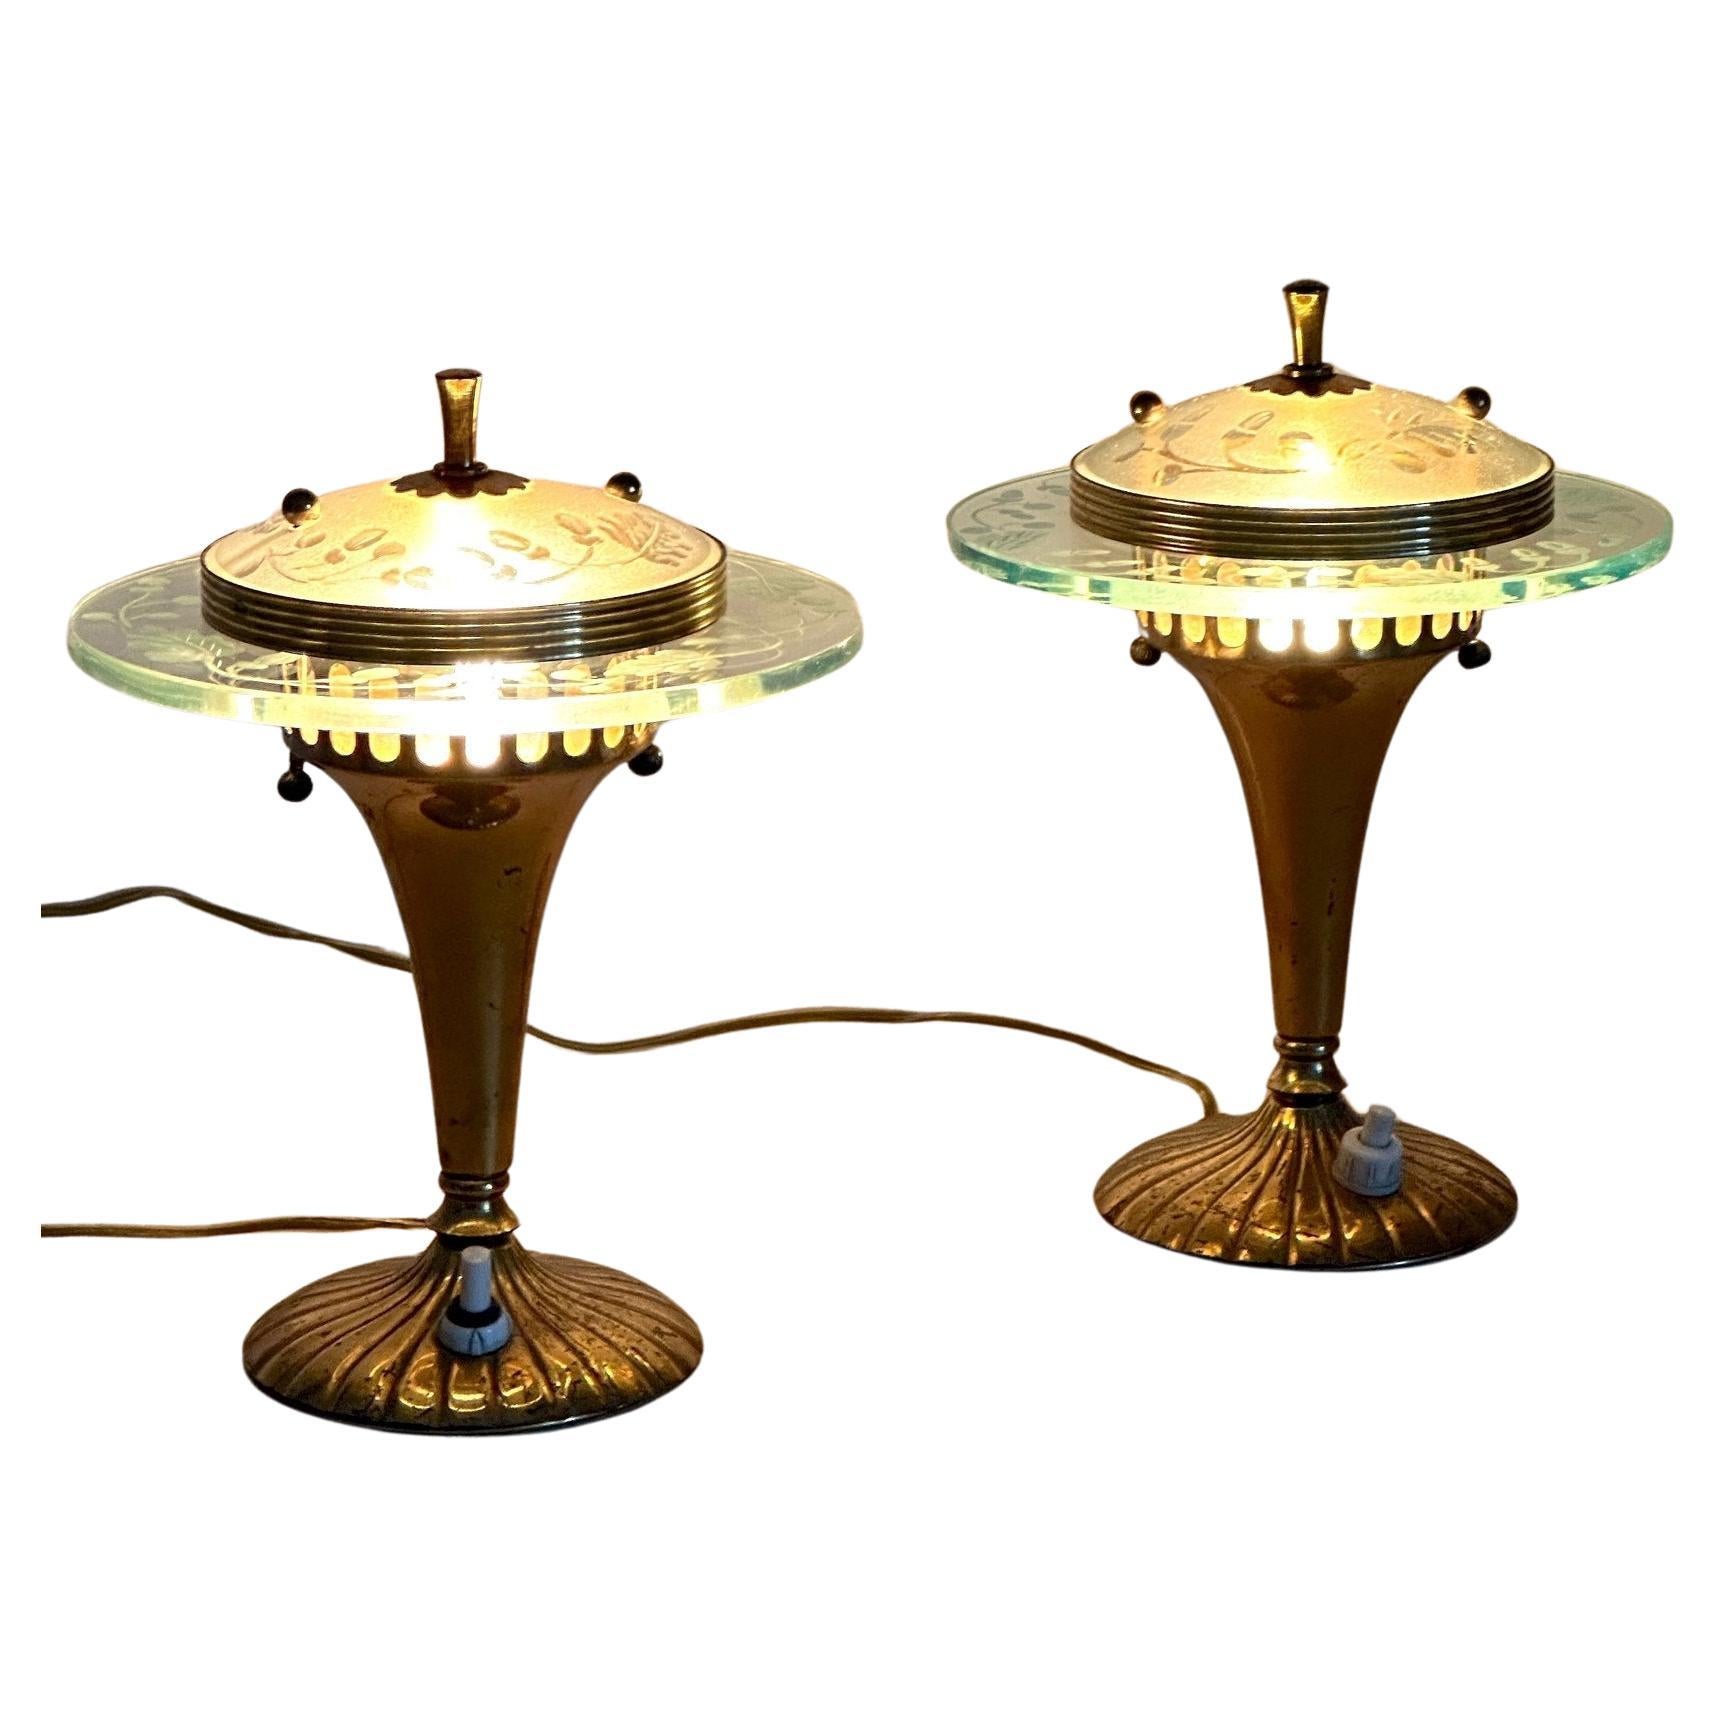 Pair of Glass and Brass Table Lamps by Pietro Chiesa for Fontana Arte